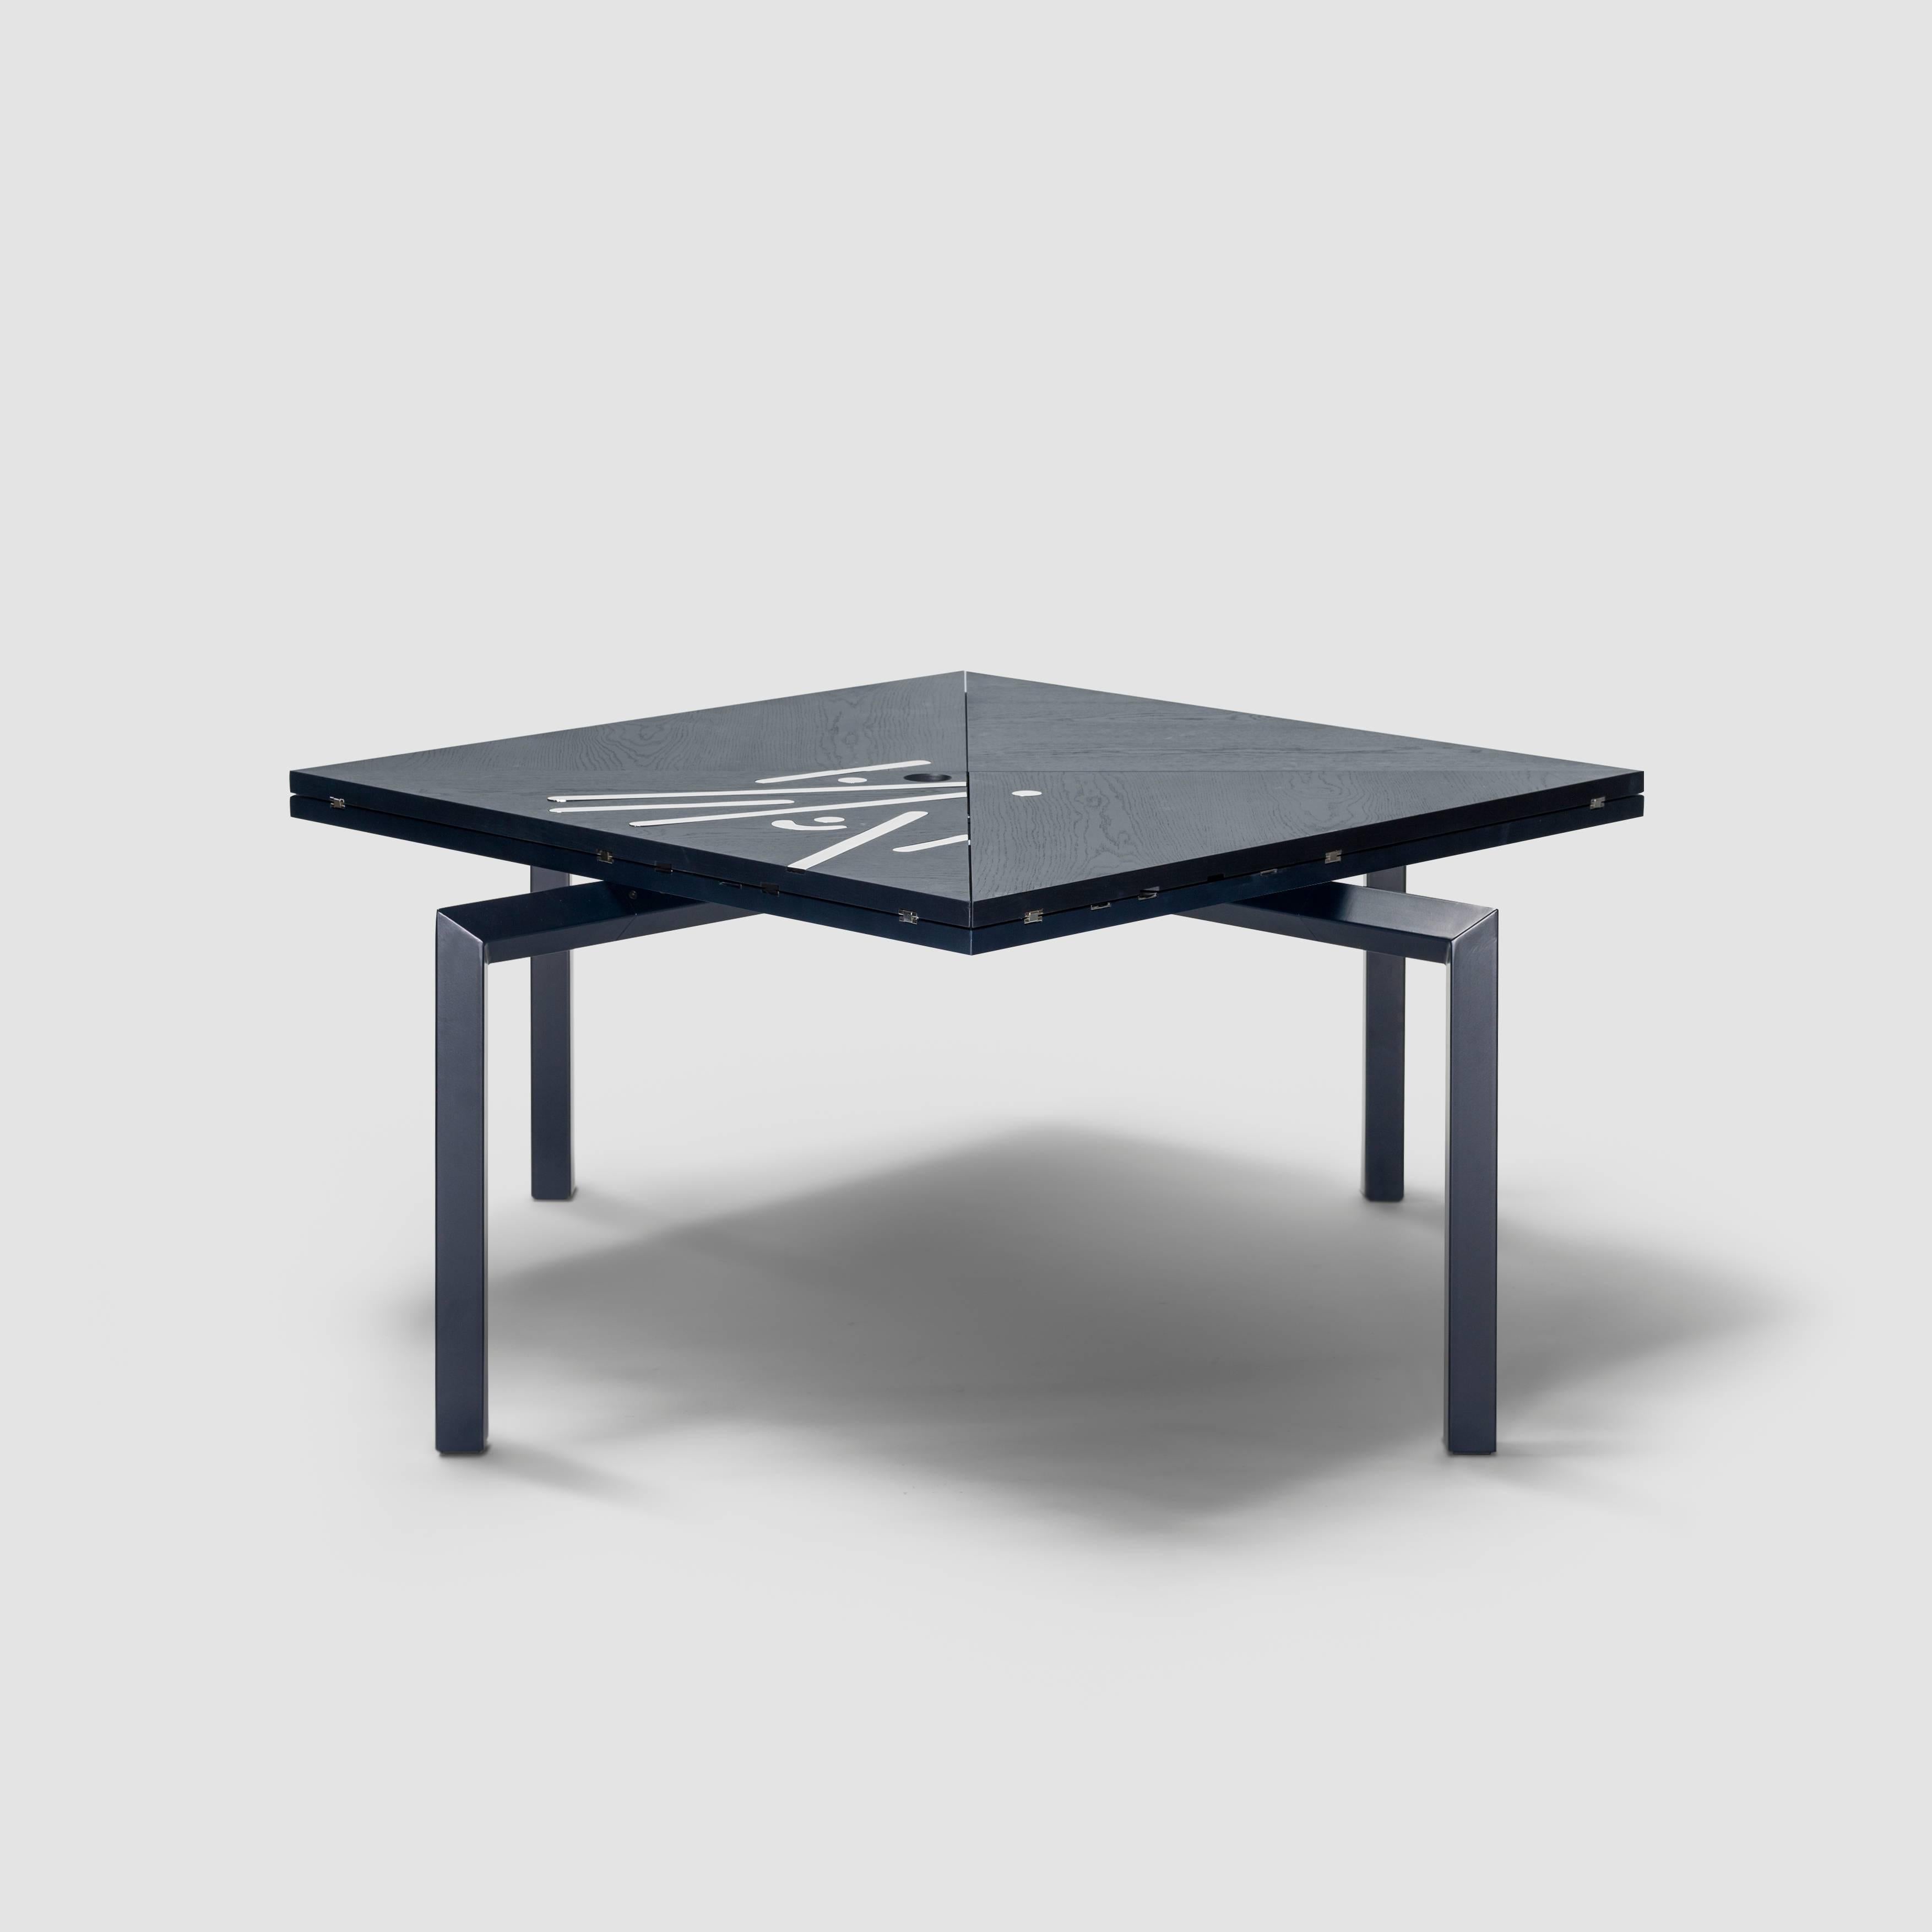 Spanish Limited Edition Alella Table by Lluis Clotet For Sale